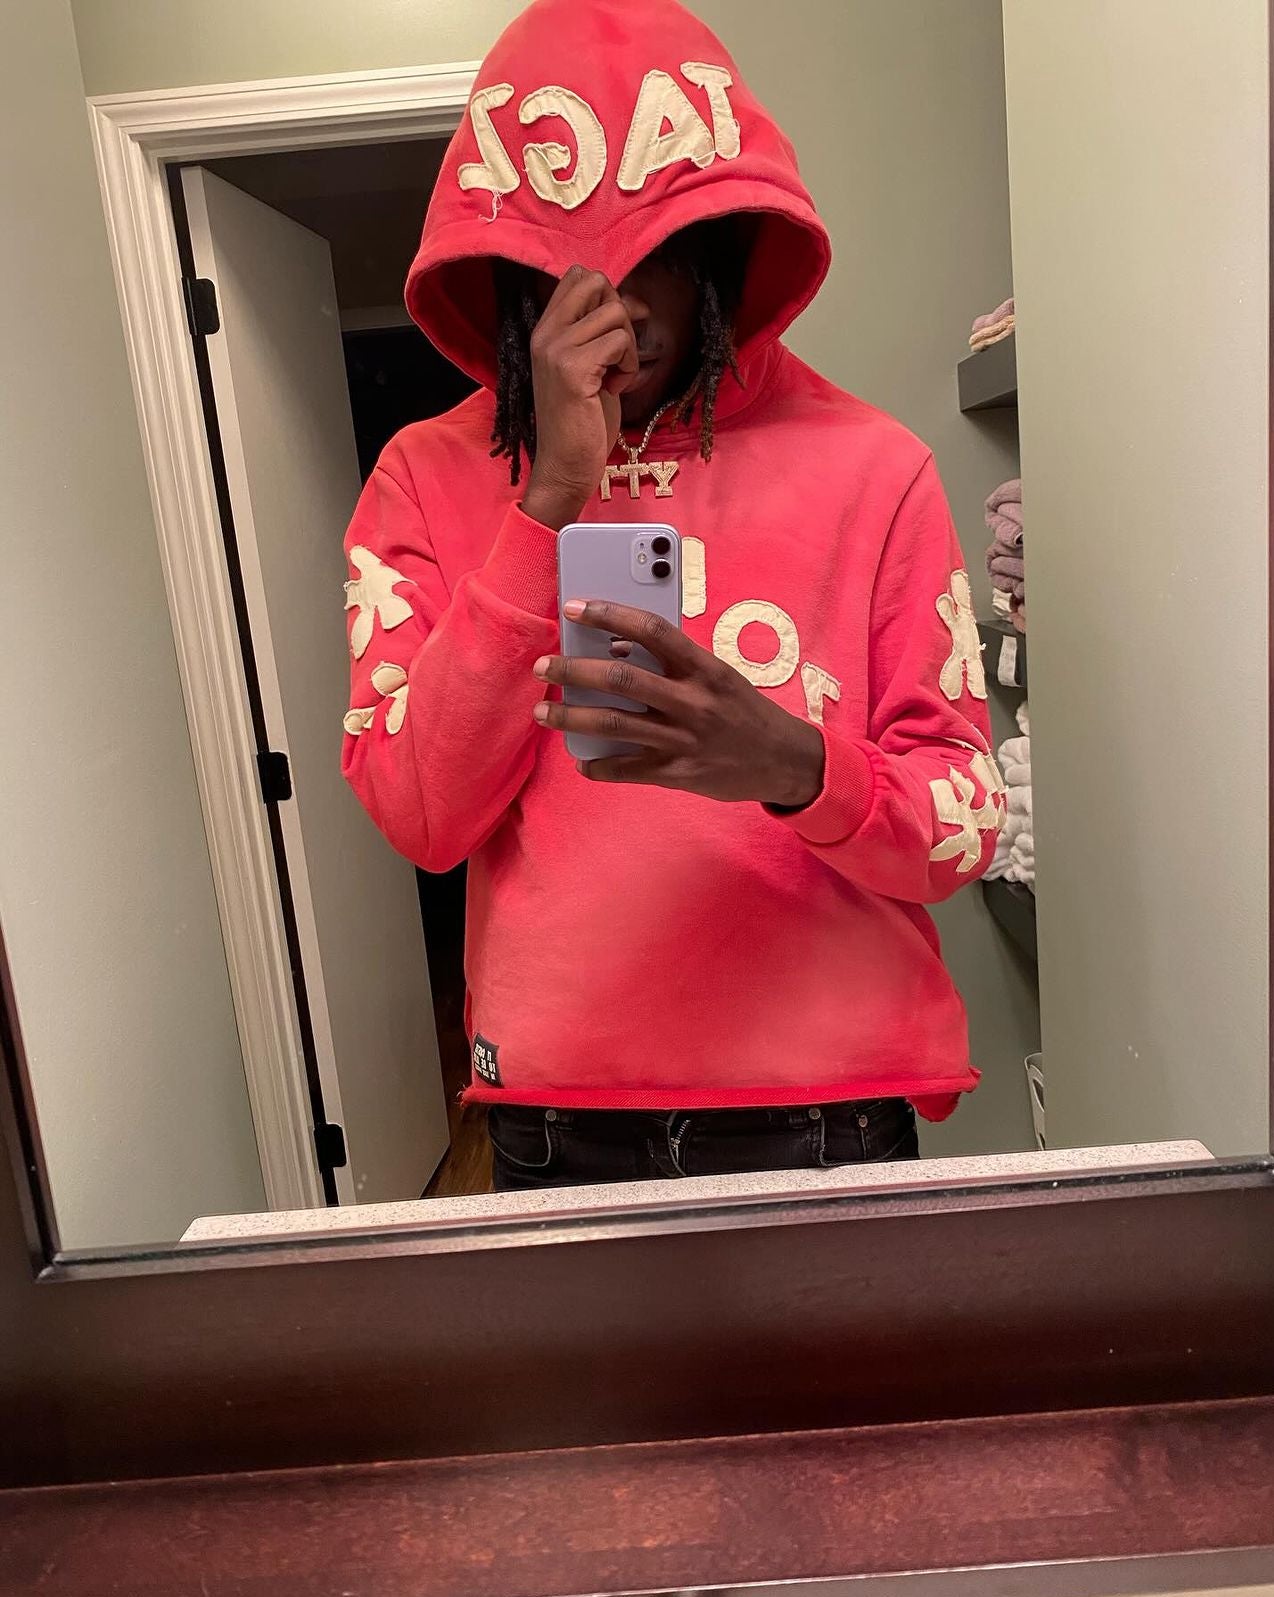 (Cropped Red Zombie Tagz Hoodie)